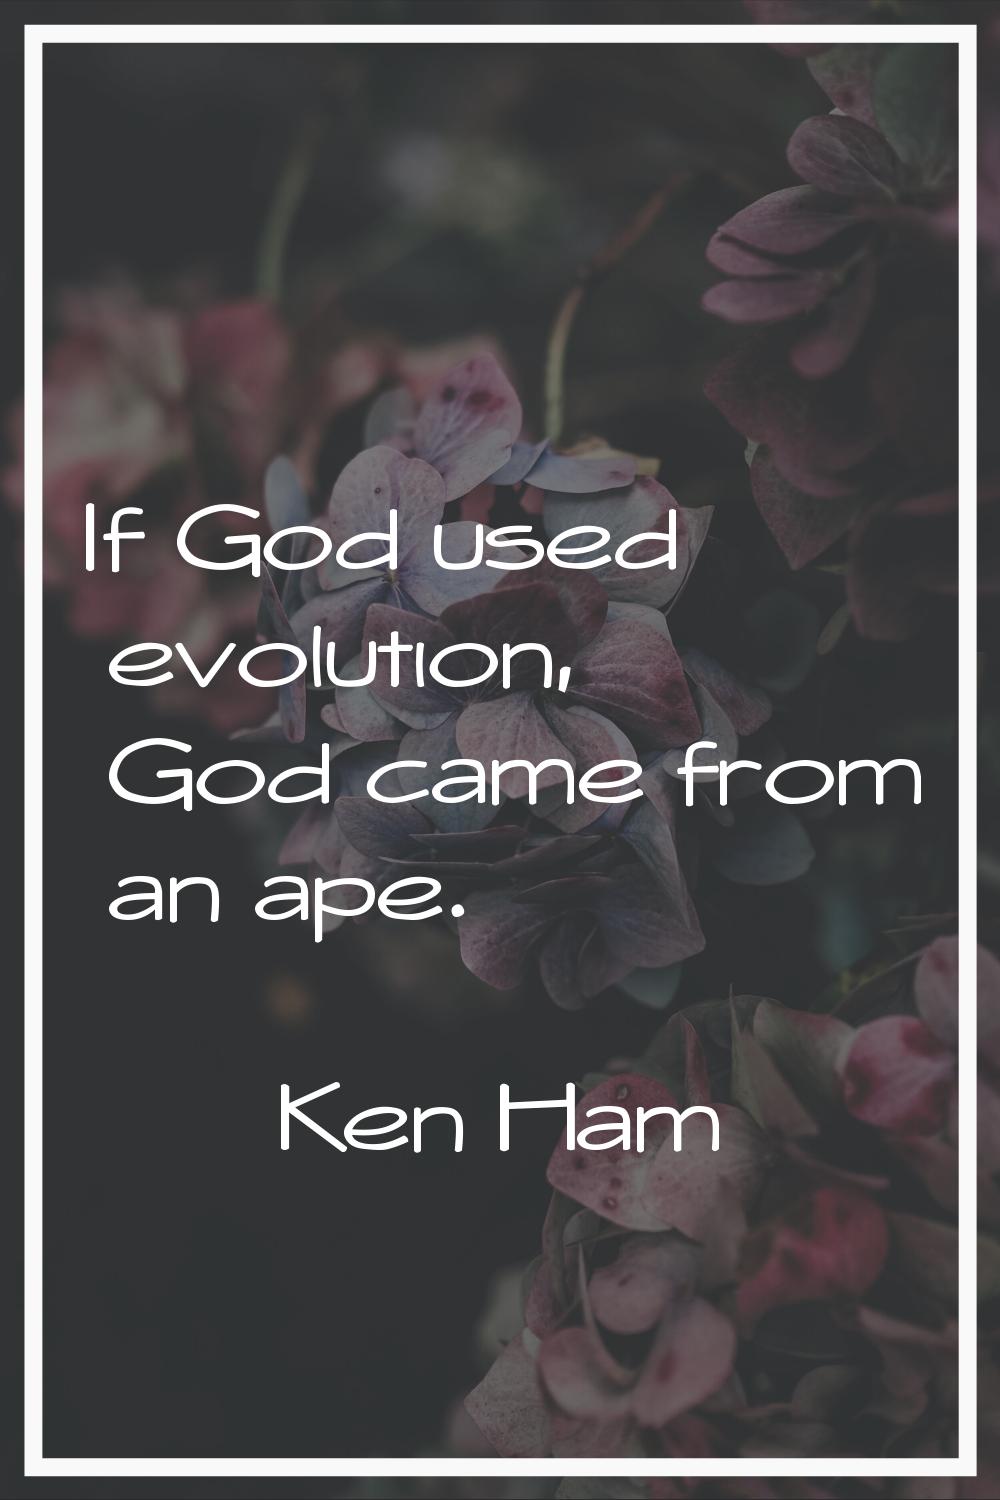 If God used evolution, God came from an ape.